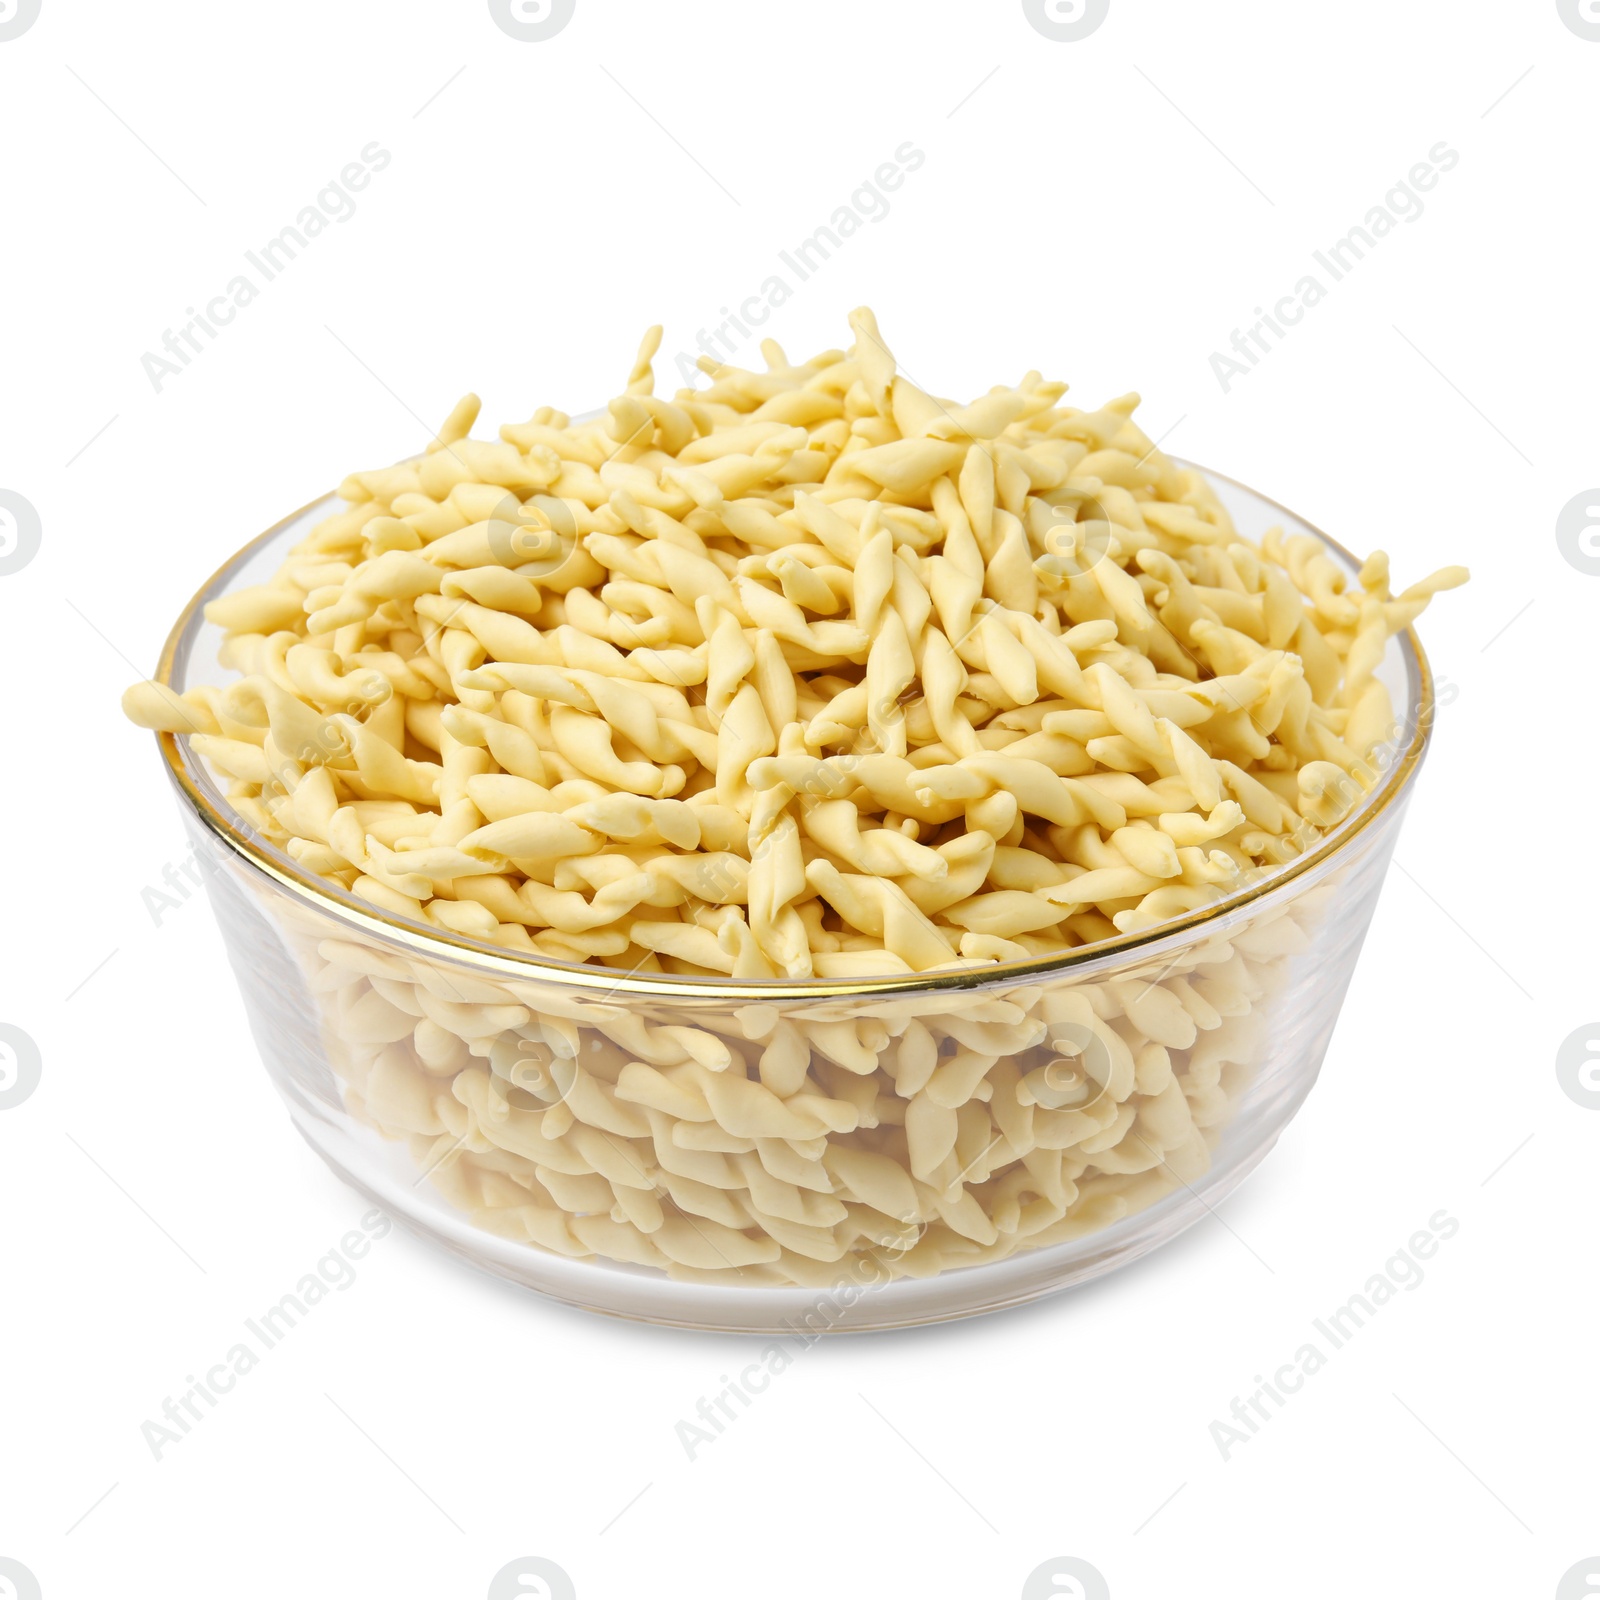 Photo of Uncooked trofie pasta in bowl isolated on white